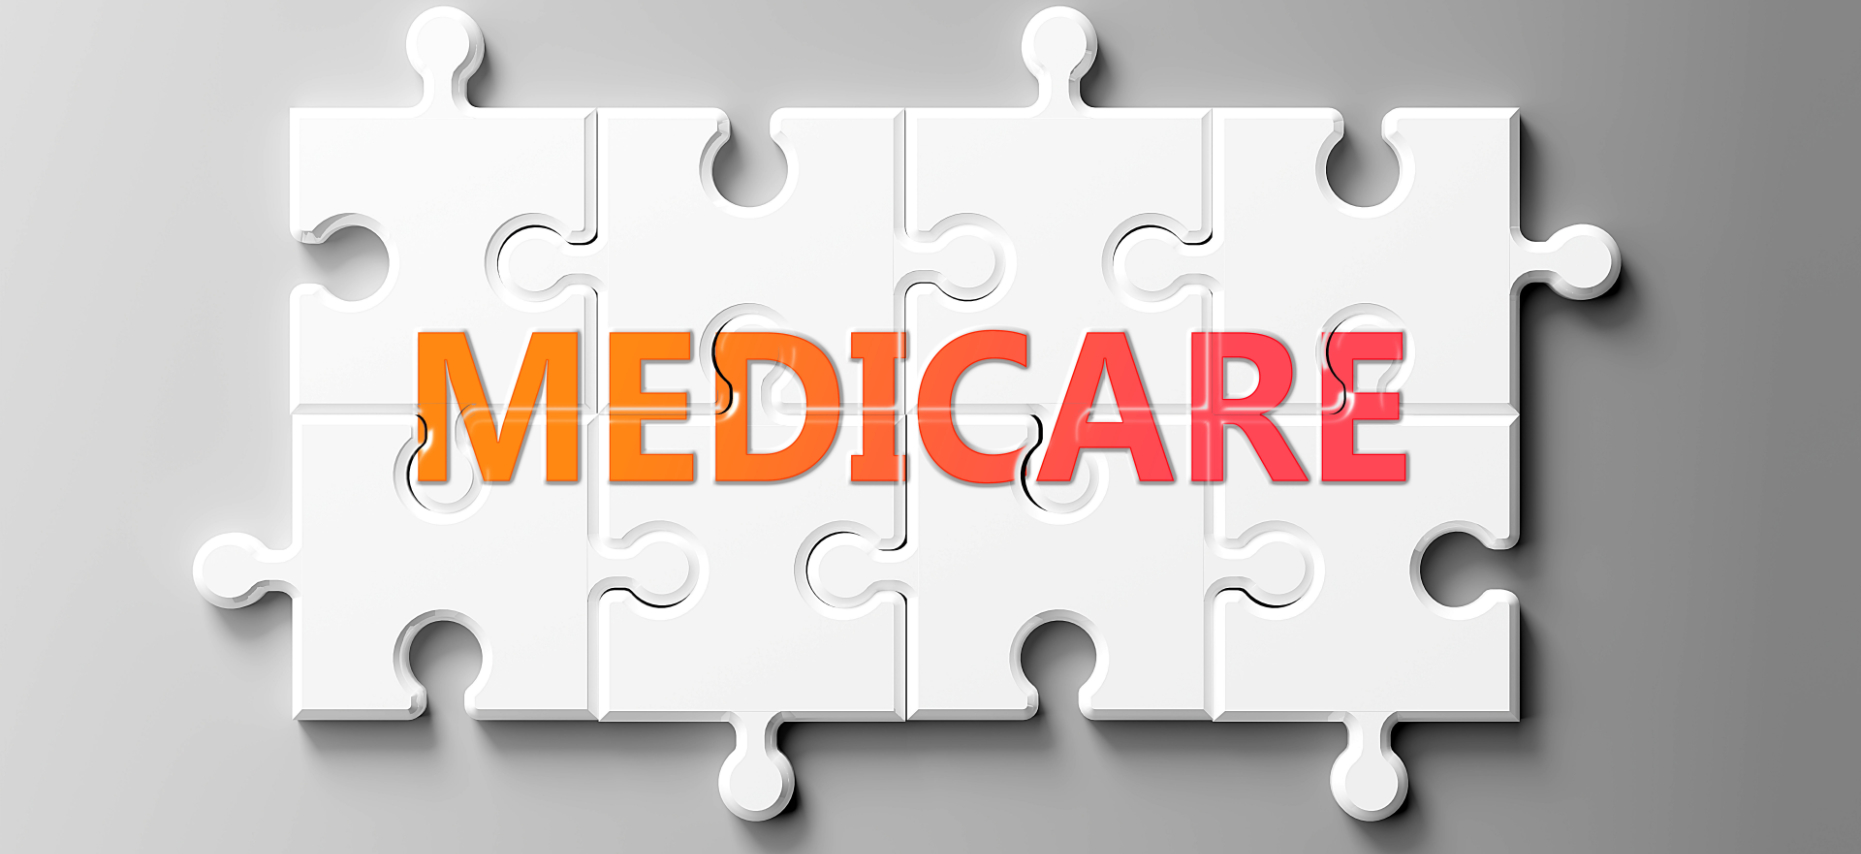 6 Important Facts About Medicare